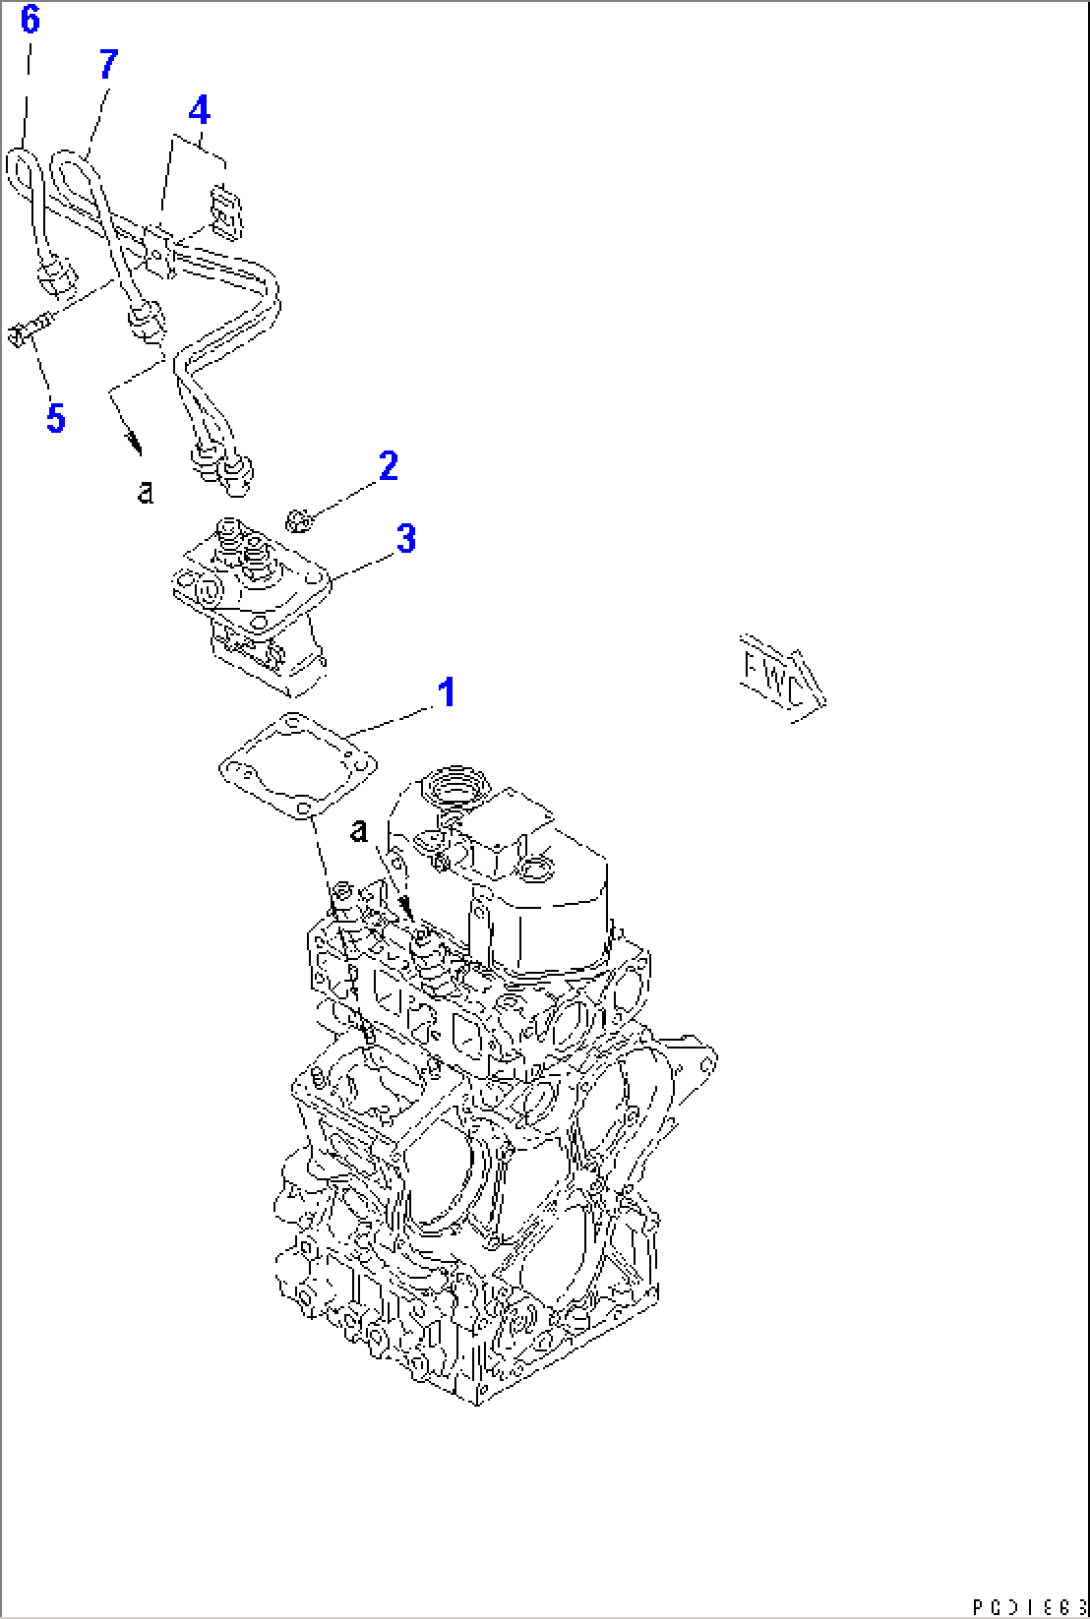 FUEL INJECTION PUMP MOUNTING